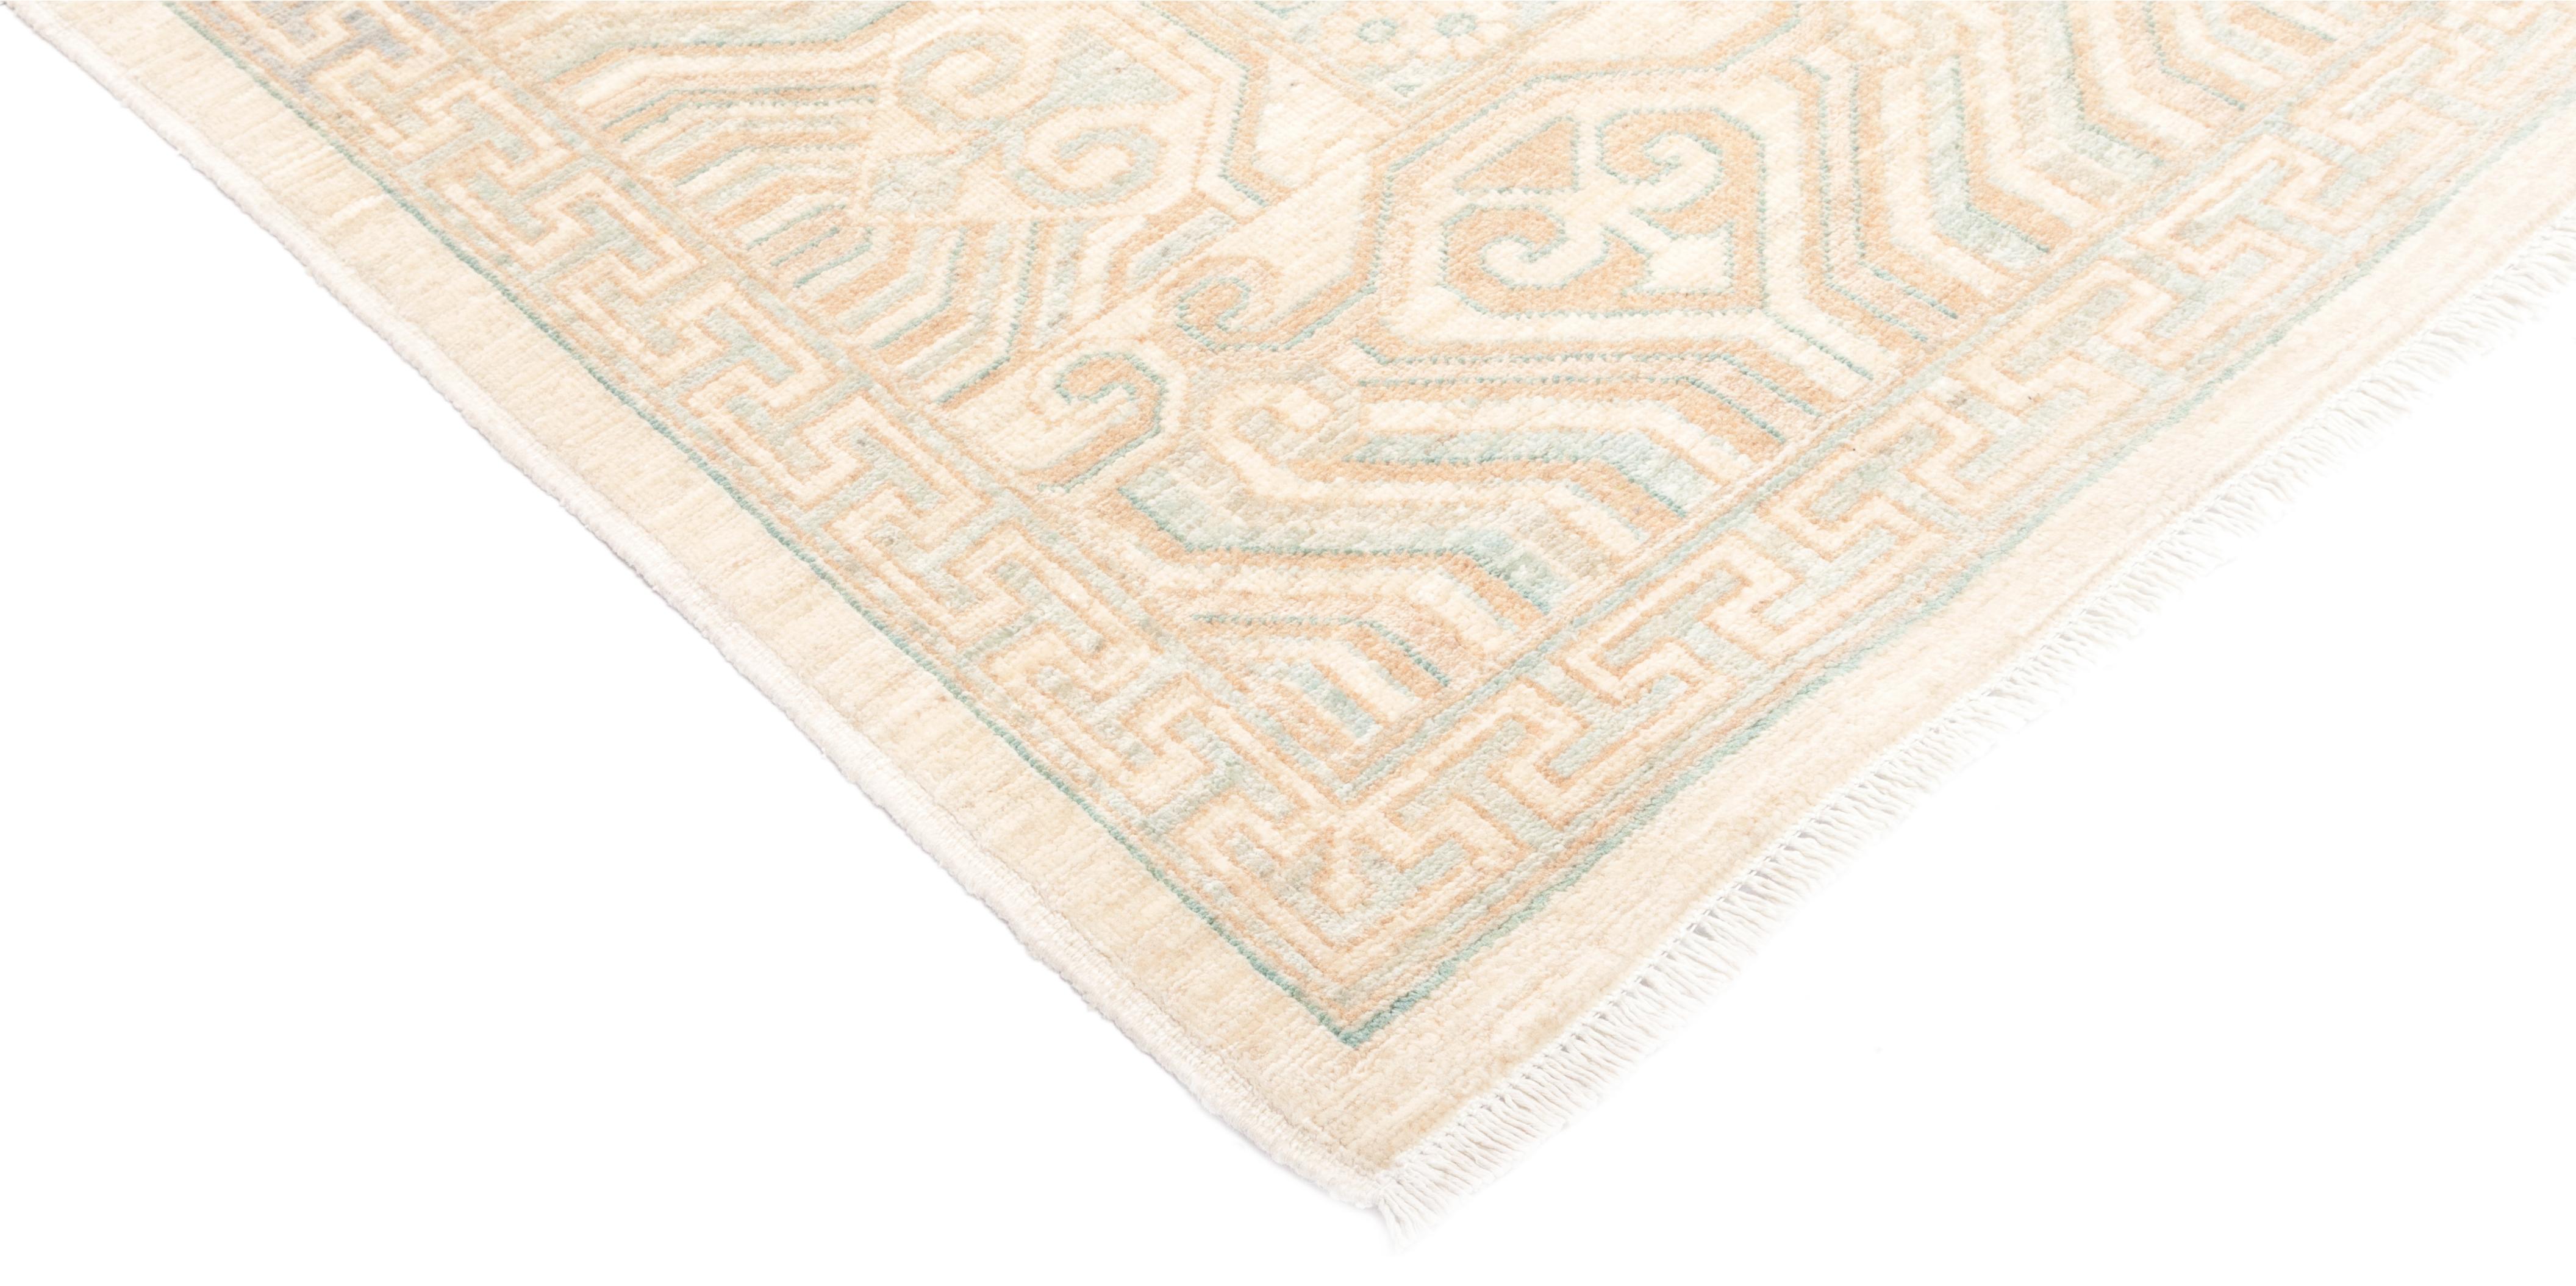 These rugs develop the decorative schemes of late 19th century Turkish carpets. These rugs have large simplified patterns in light tonalities featuring ivory, pale blue, rust, salmon and light green. The origin of these patterns derive from Persia,